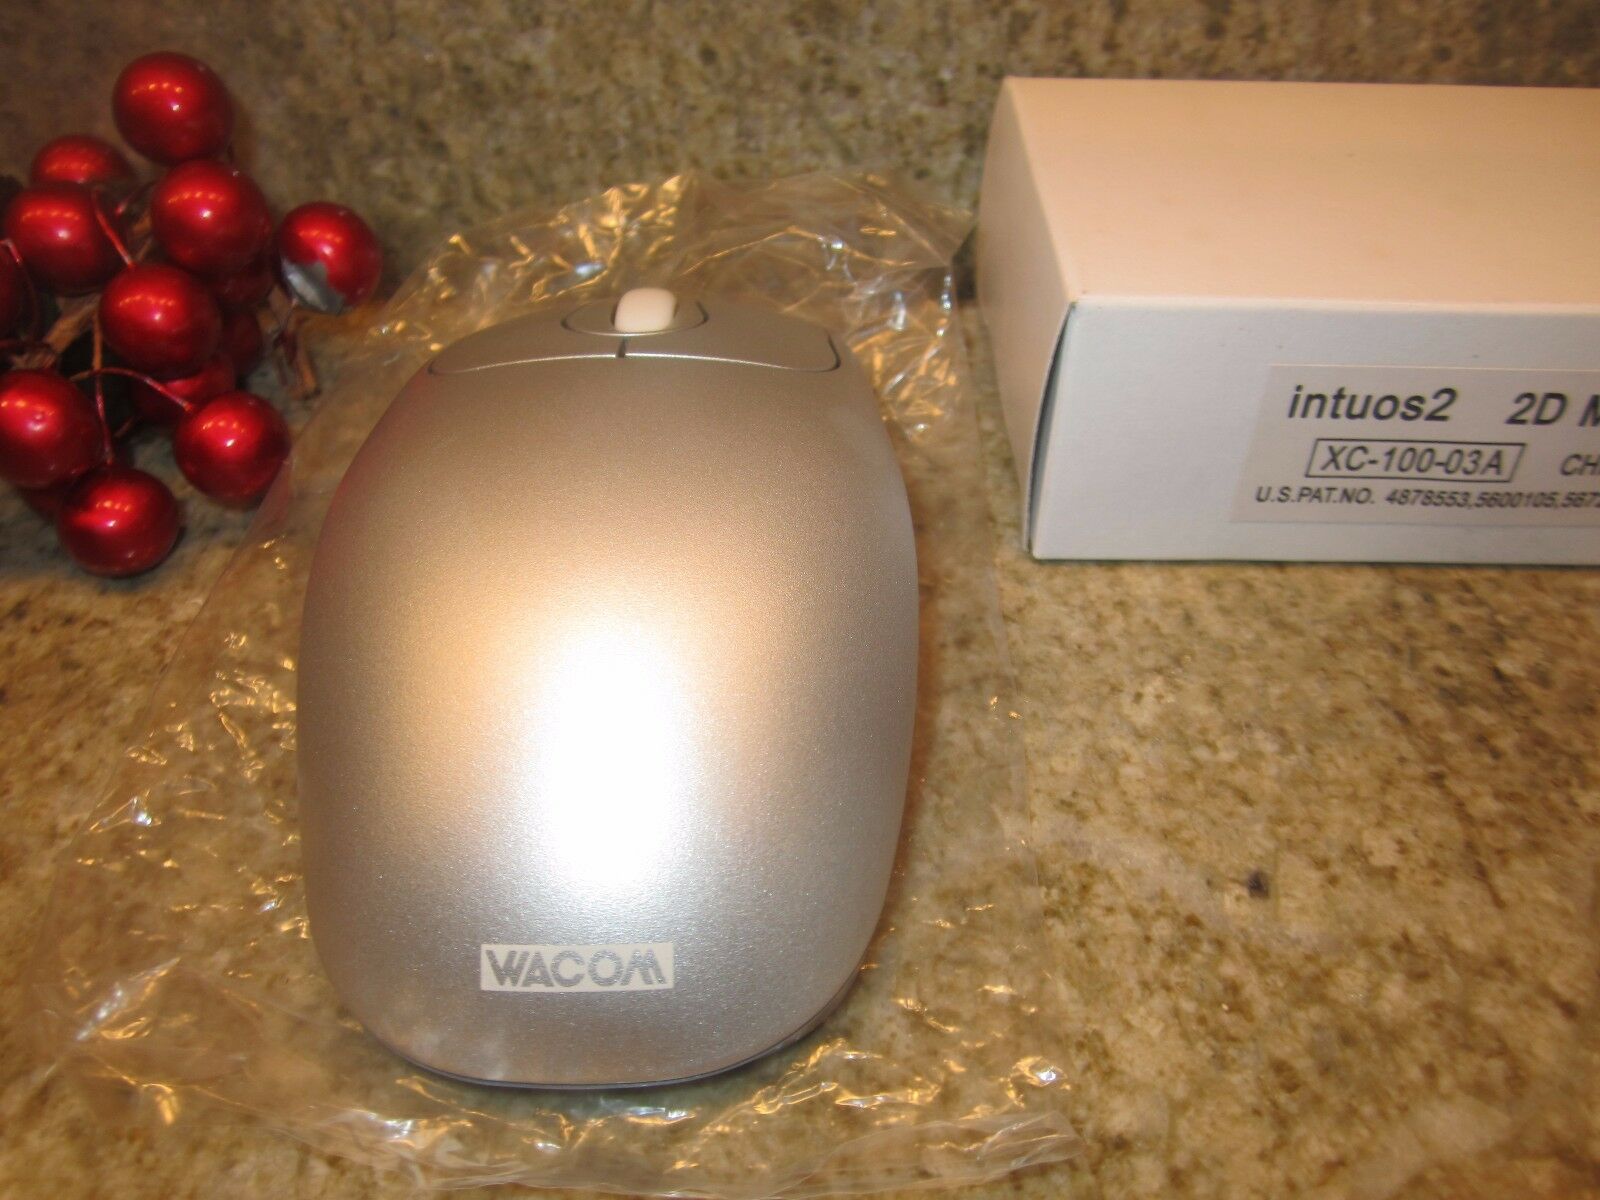 Wacom Intuos2 2D Drawing Tablet Wireless Mouse Silver XC-100-03A